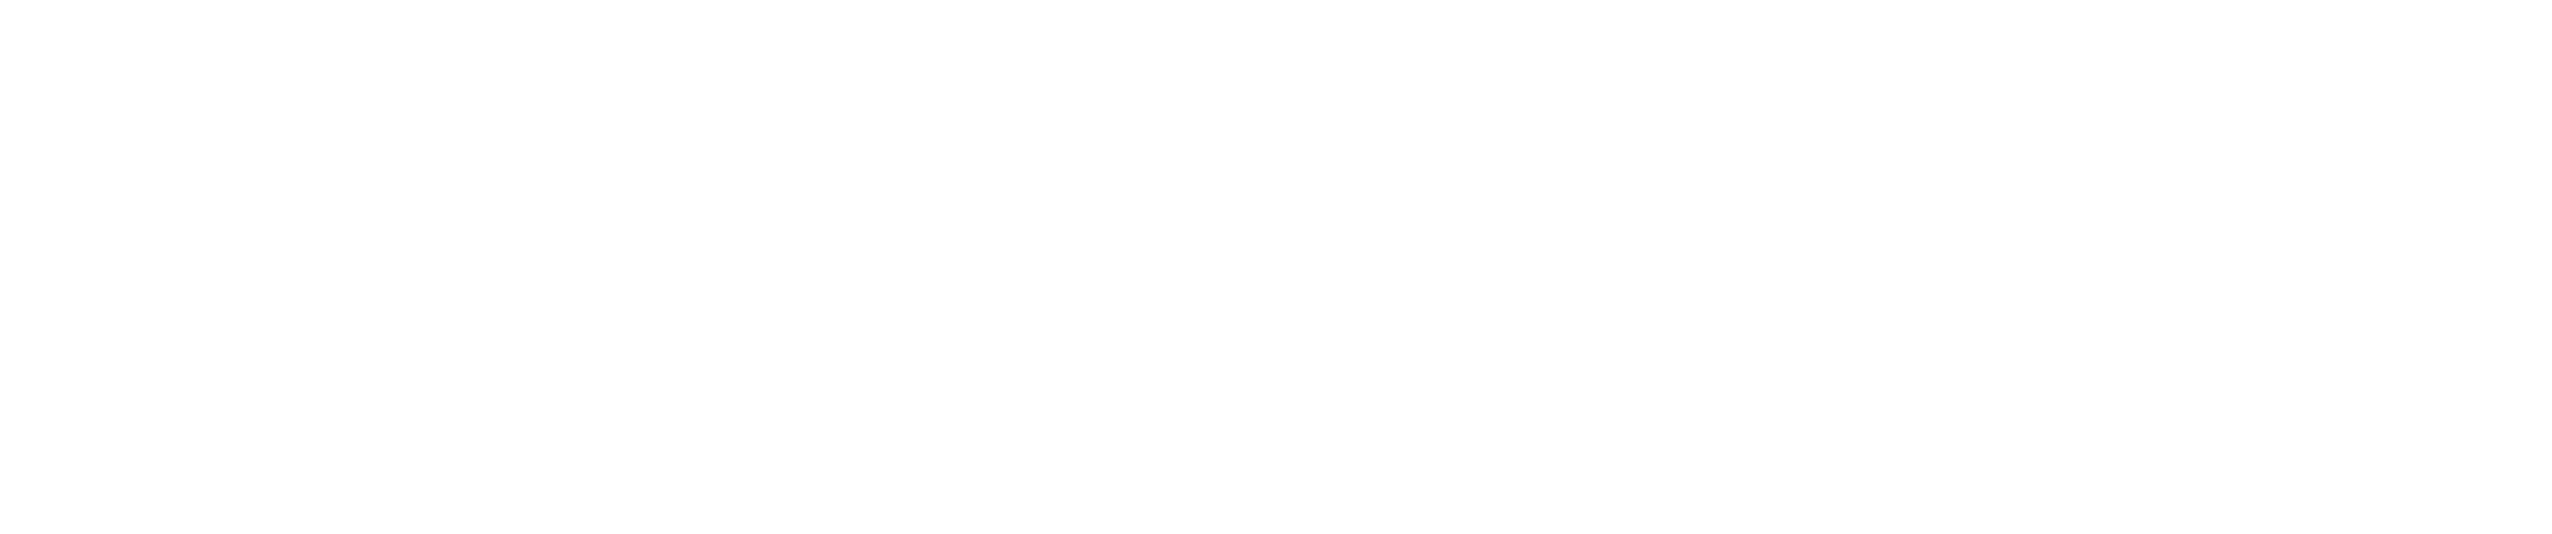 First Command Logo in different colors